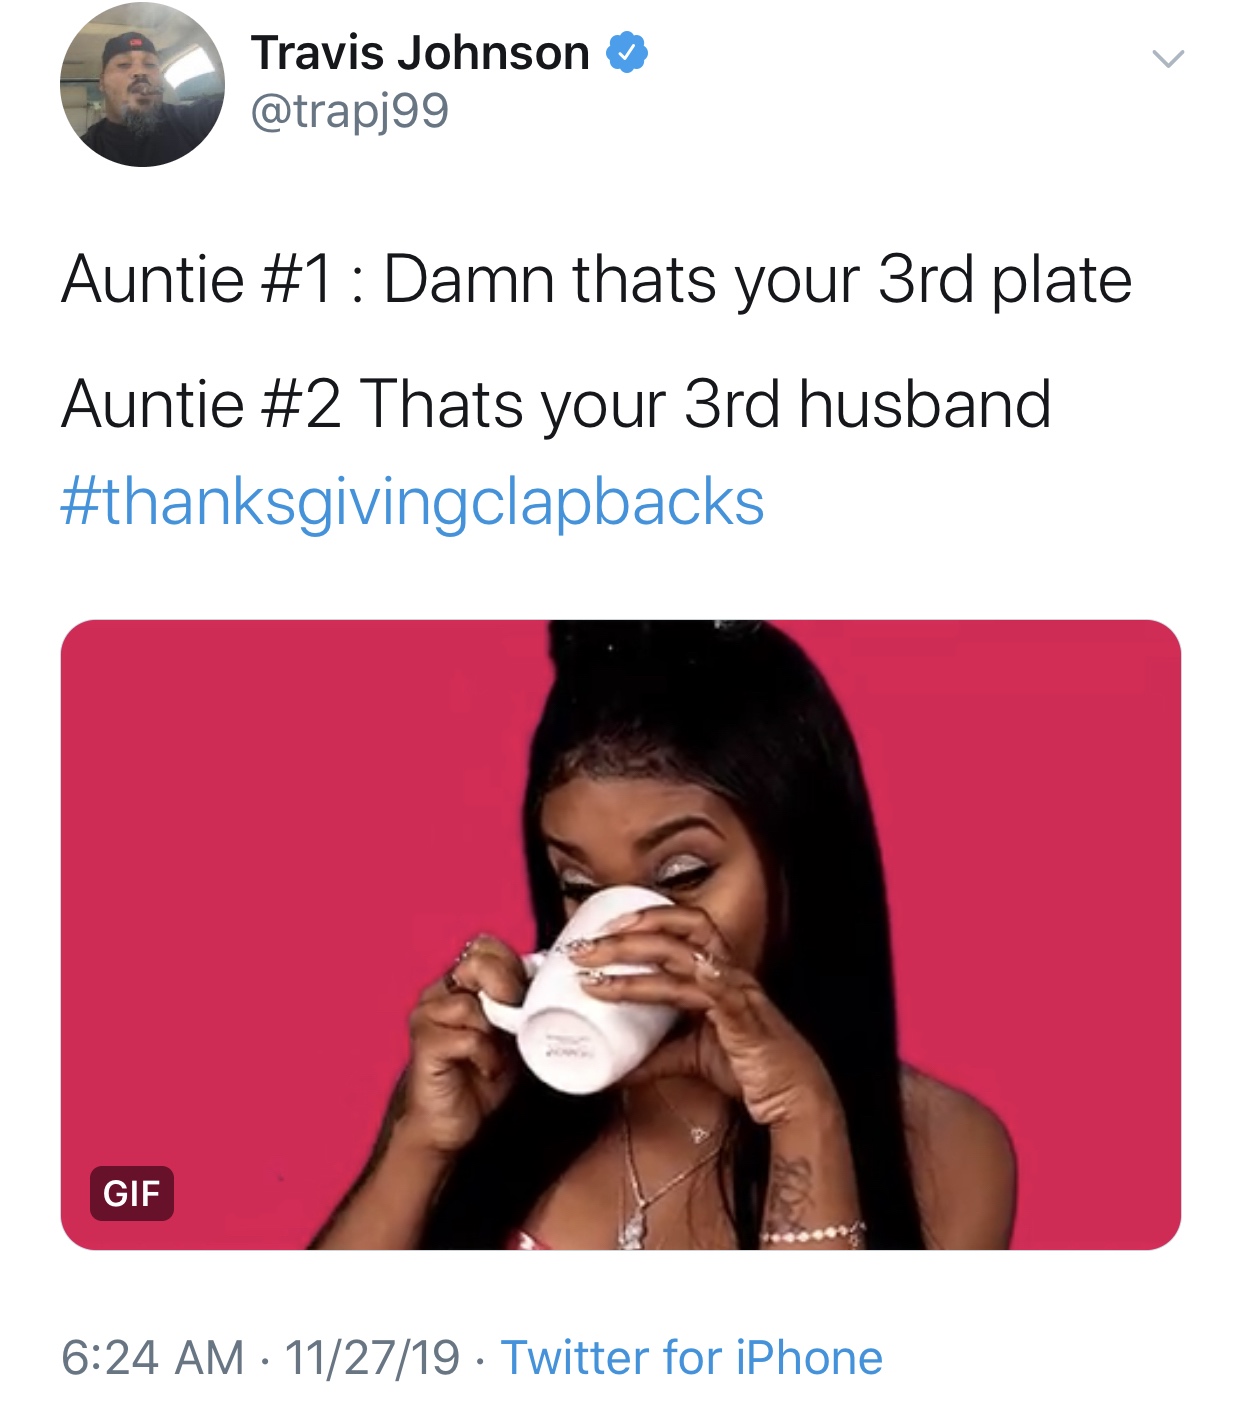 yoruba men memes - Travis Johnson Auntie Damn thats your 3rd plate Auntie Thats your 3rd husband Gif 112719 Twitter for iPhone